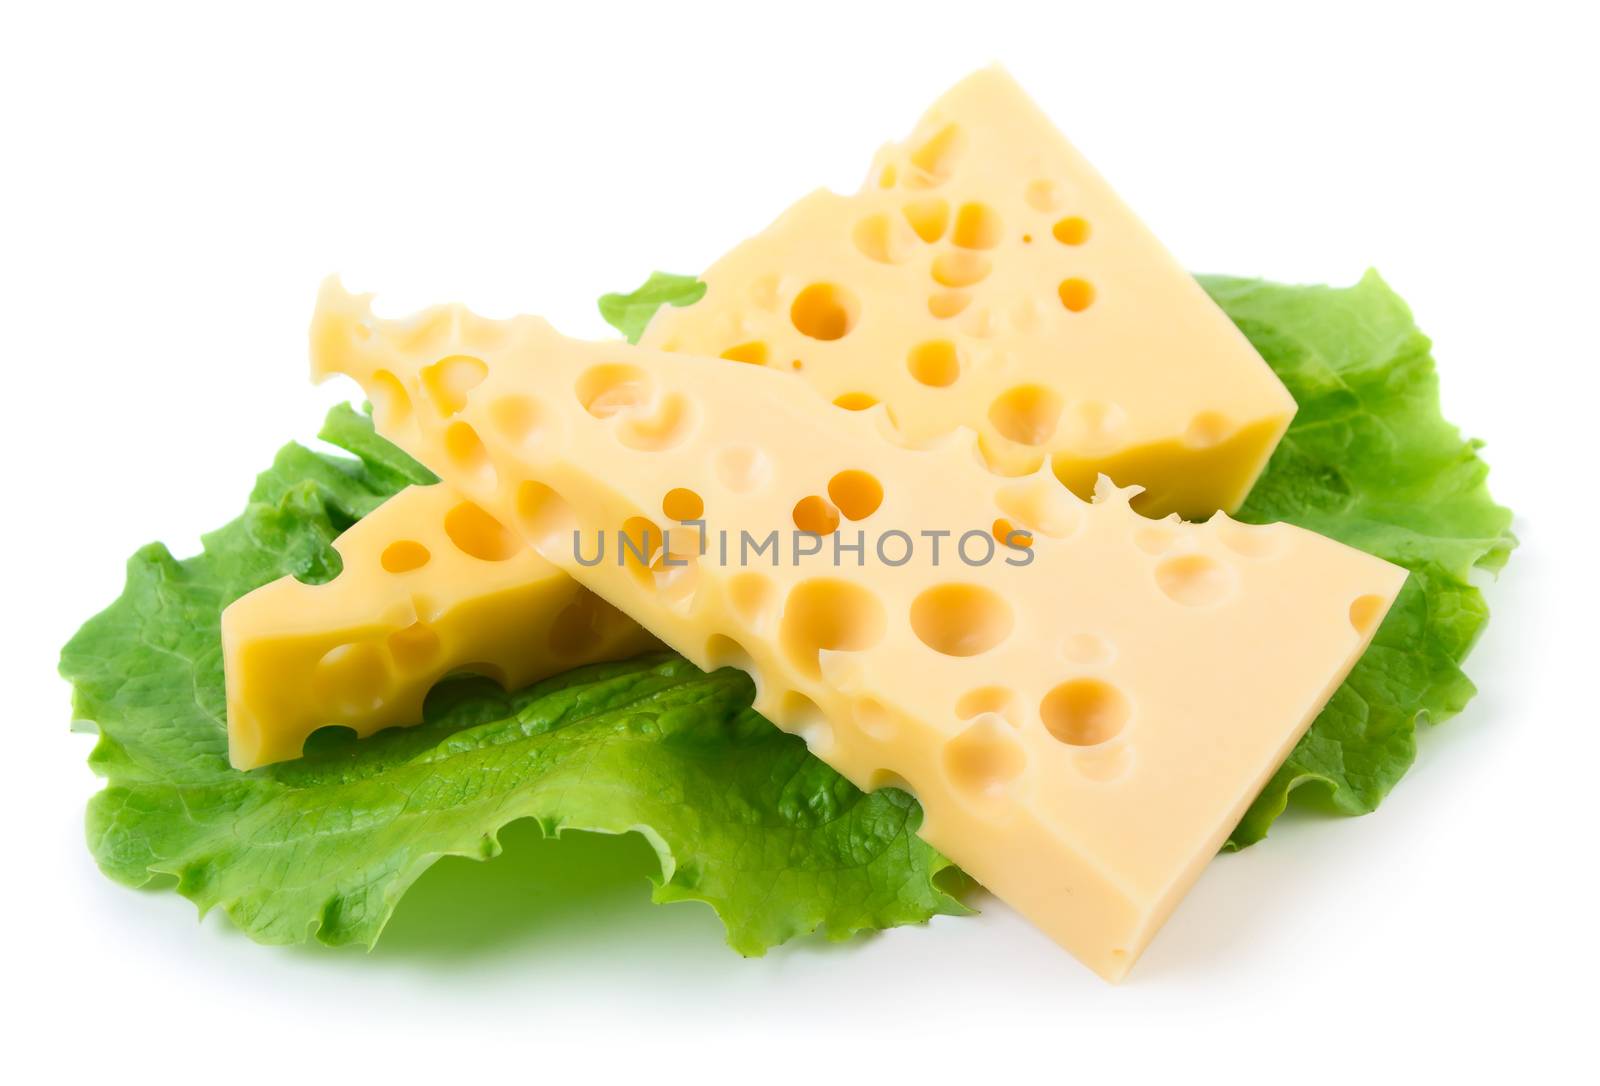 Cheese with green herb isolated on white background